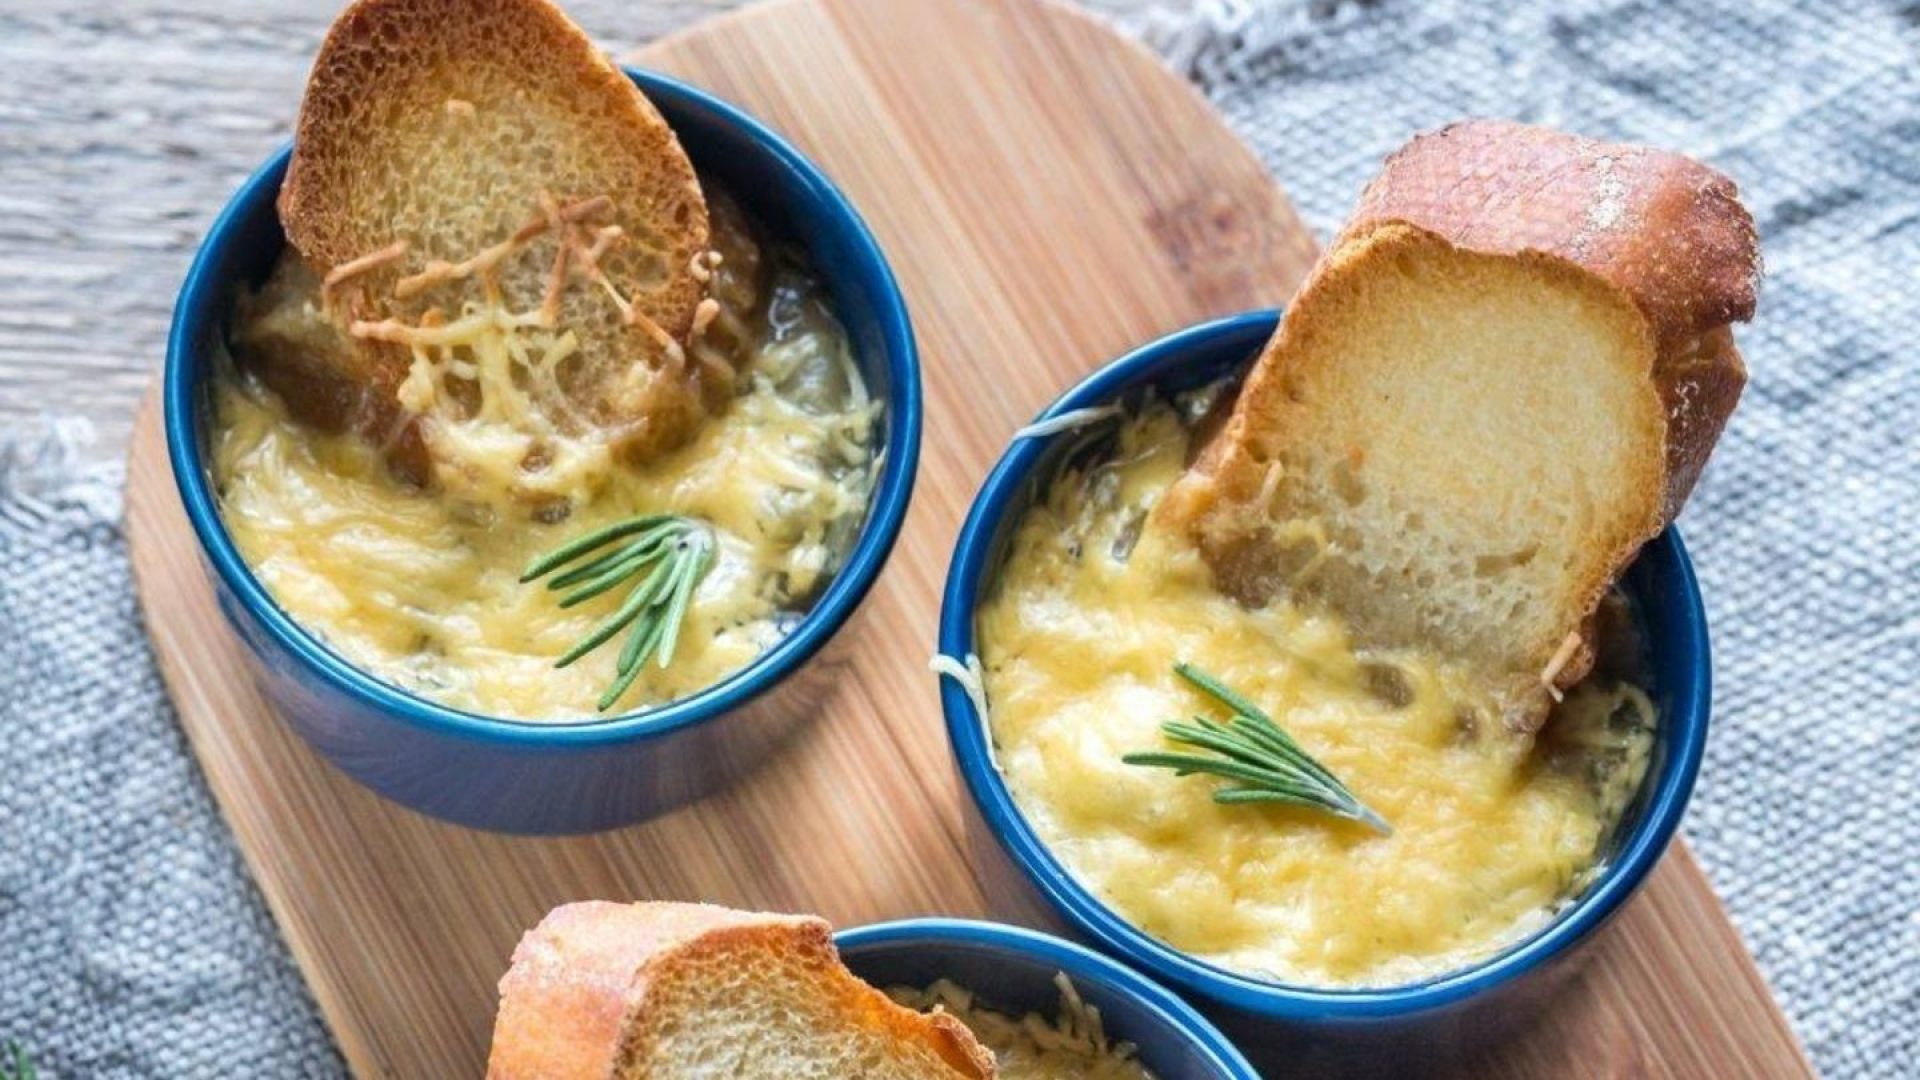 French Onion Soup - Mrs Miller's Homemade Noodles